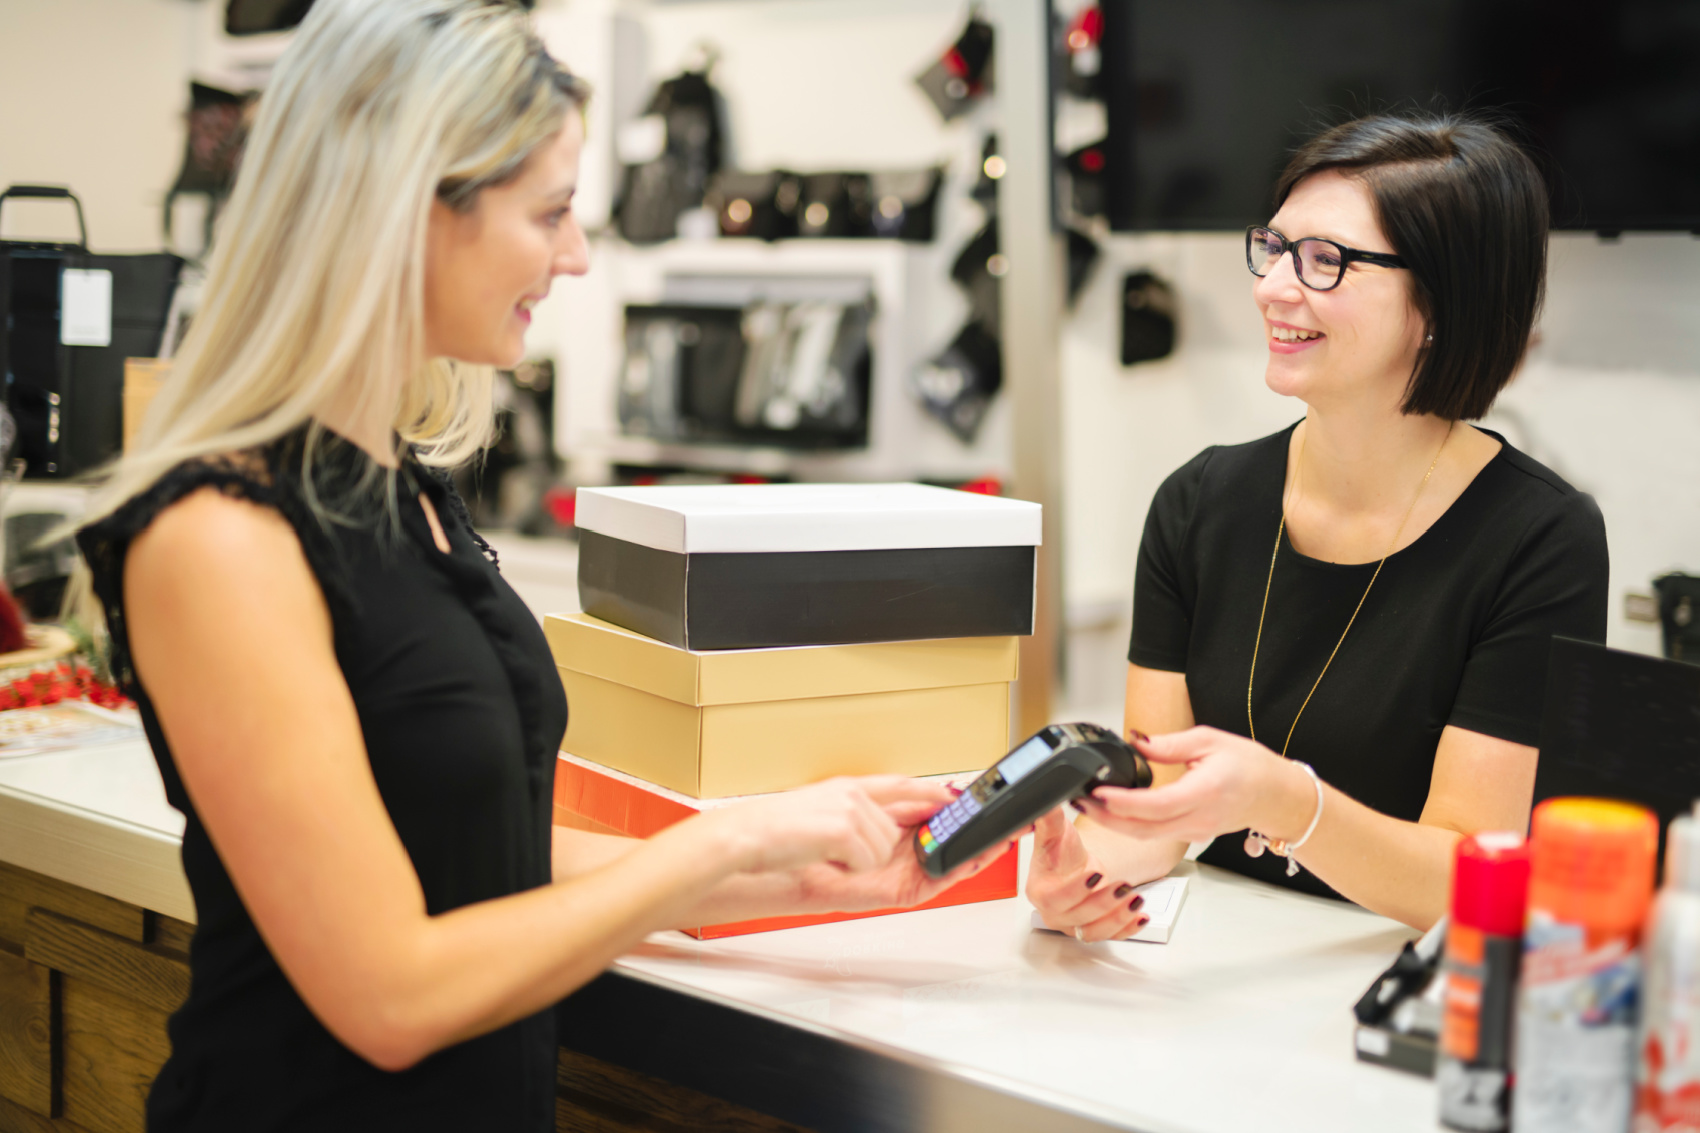 |Retail stores and loyalty programs don’t need your real cell phone number. Give them your disposable online phone number from Hushed instead.